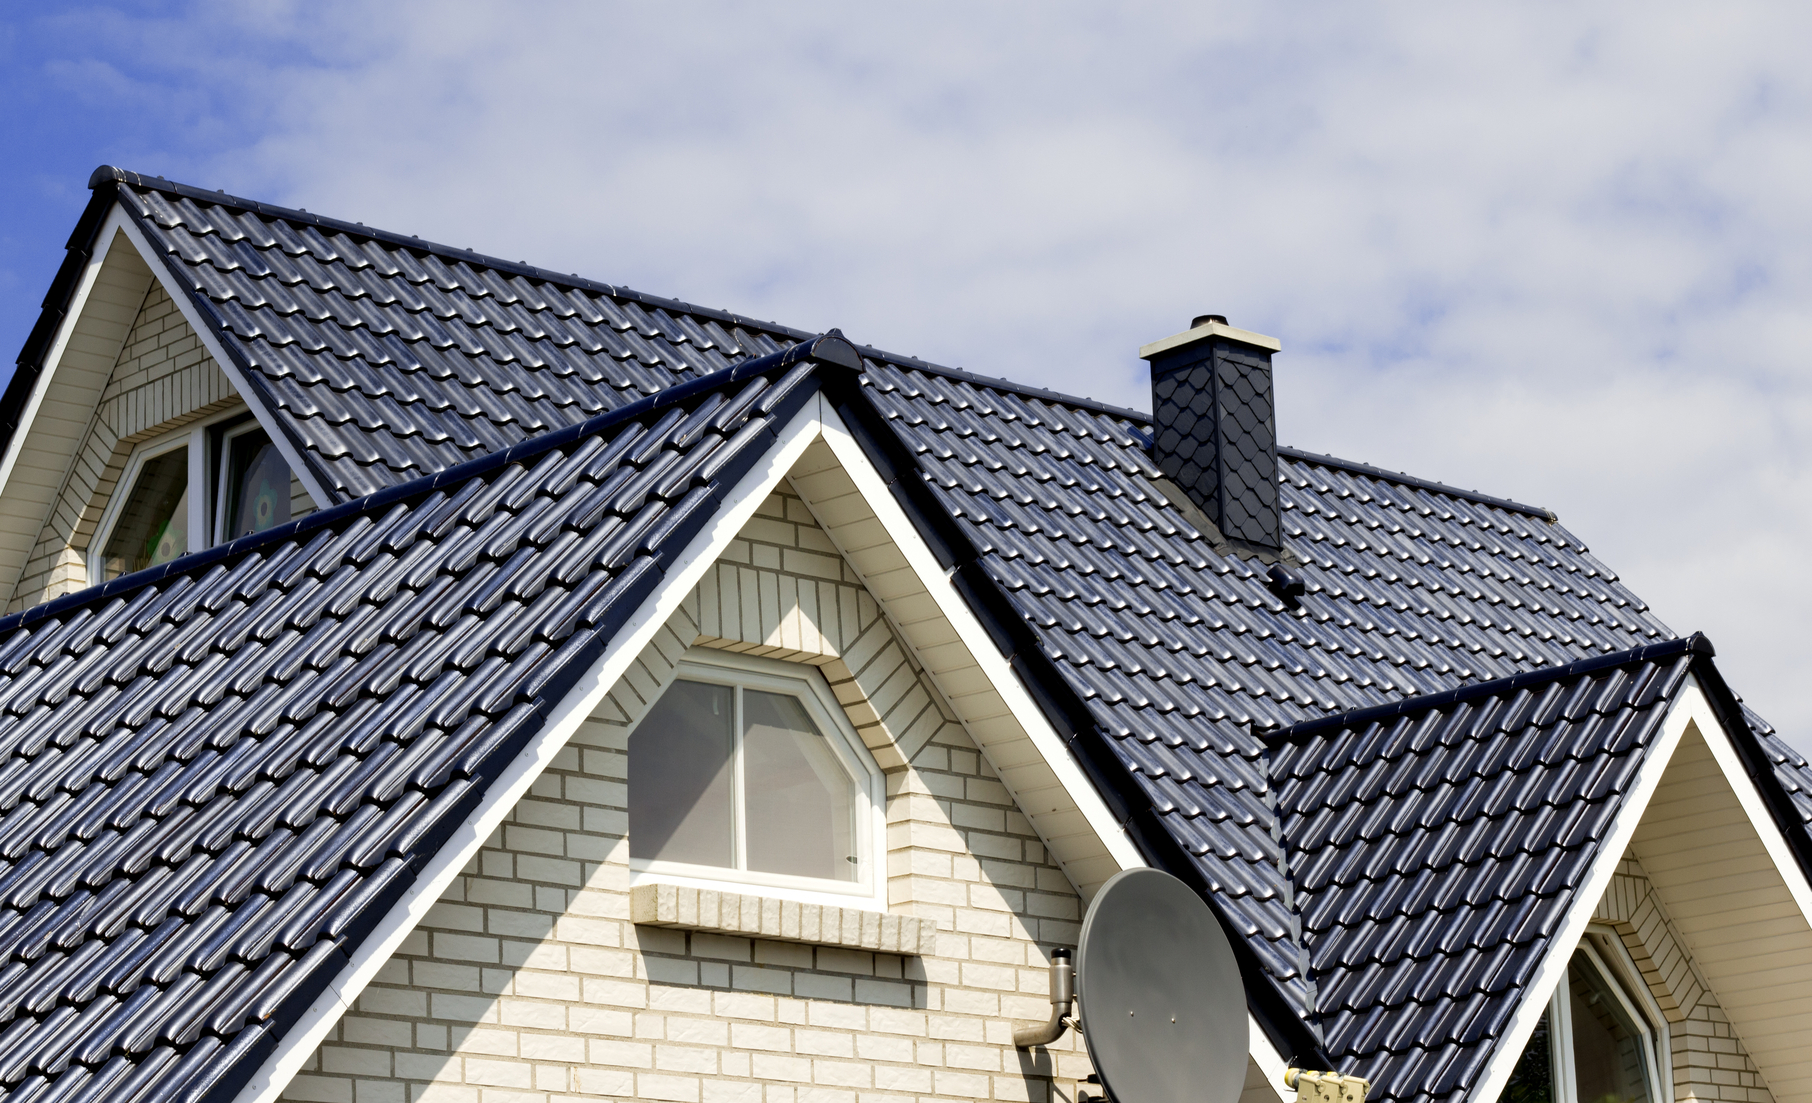 The Top 5 Signs You Need a New Roof | Themocracy